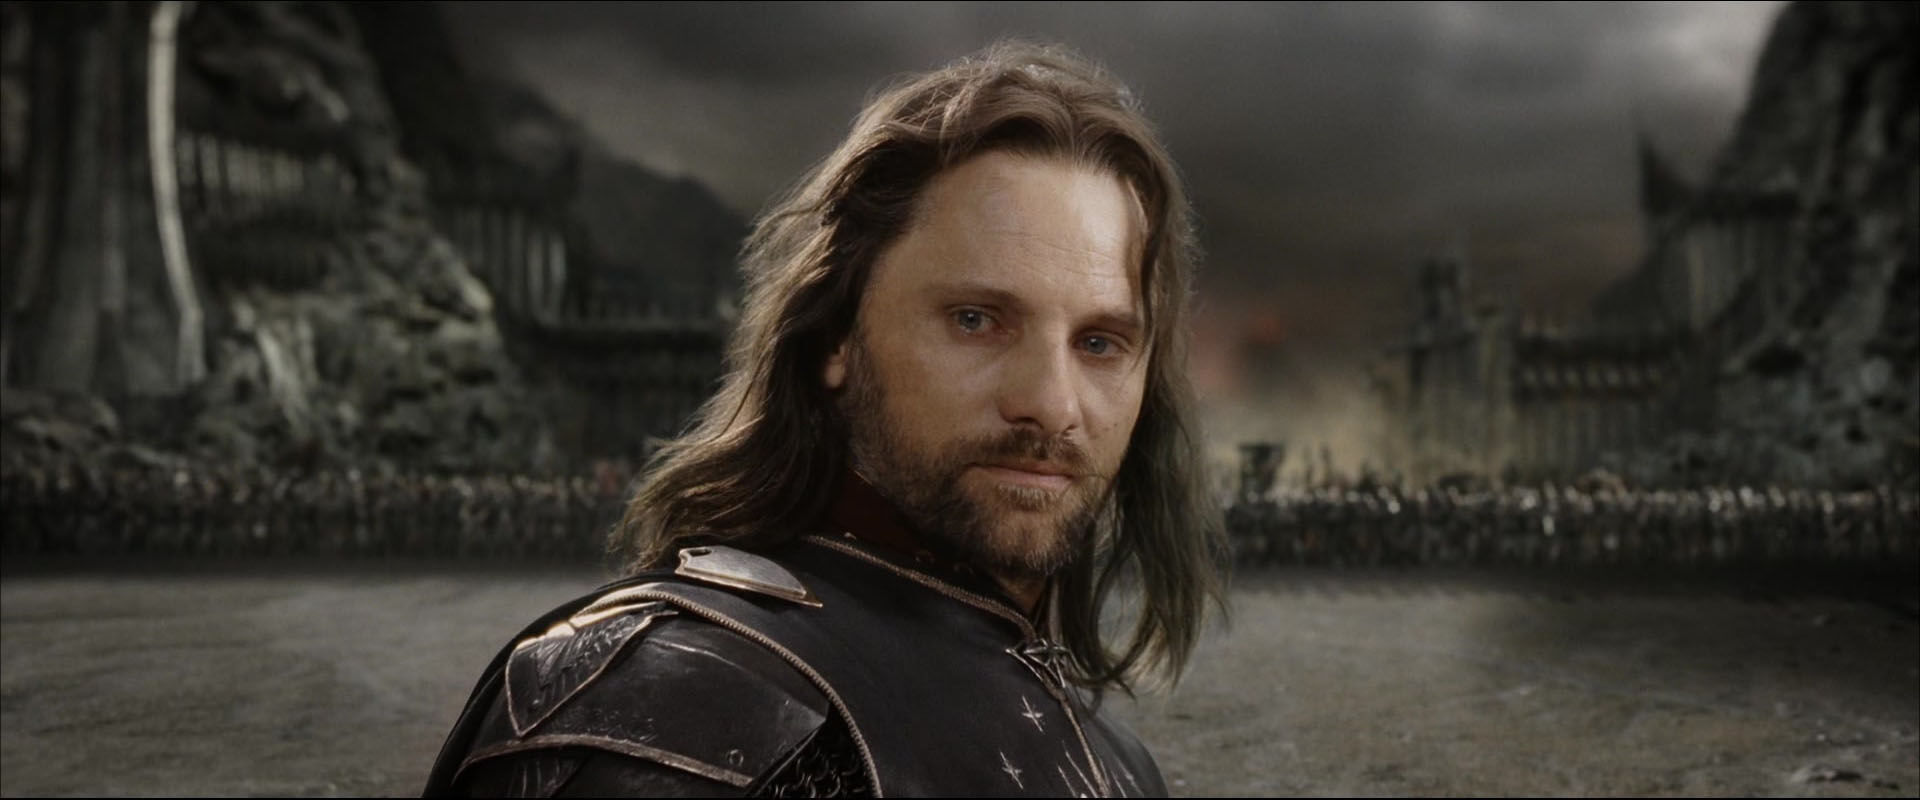 Lord Of The Rings: Worst Things Done By Aragorn